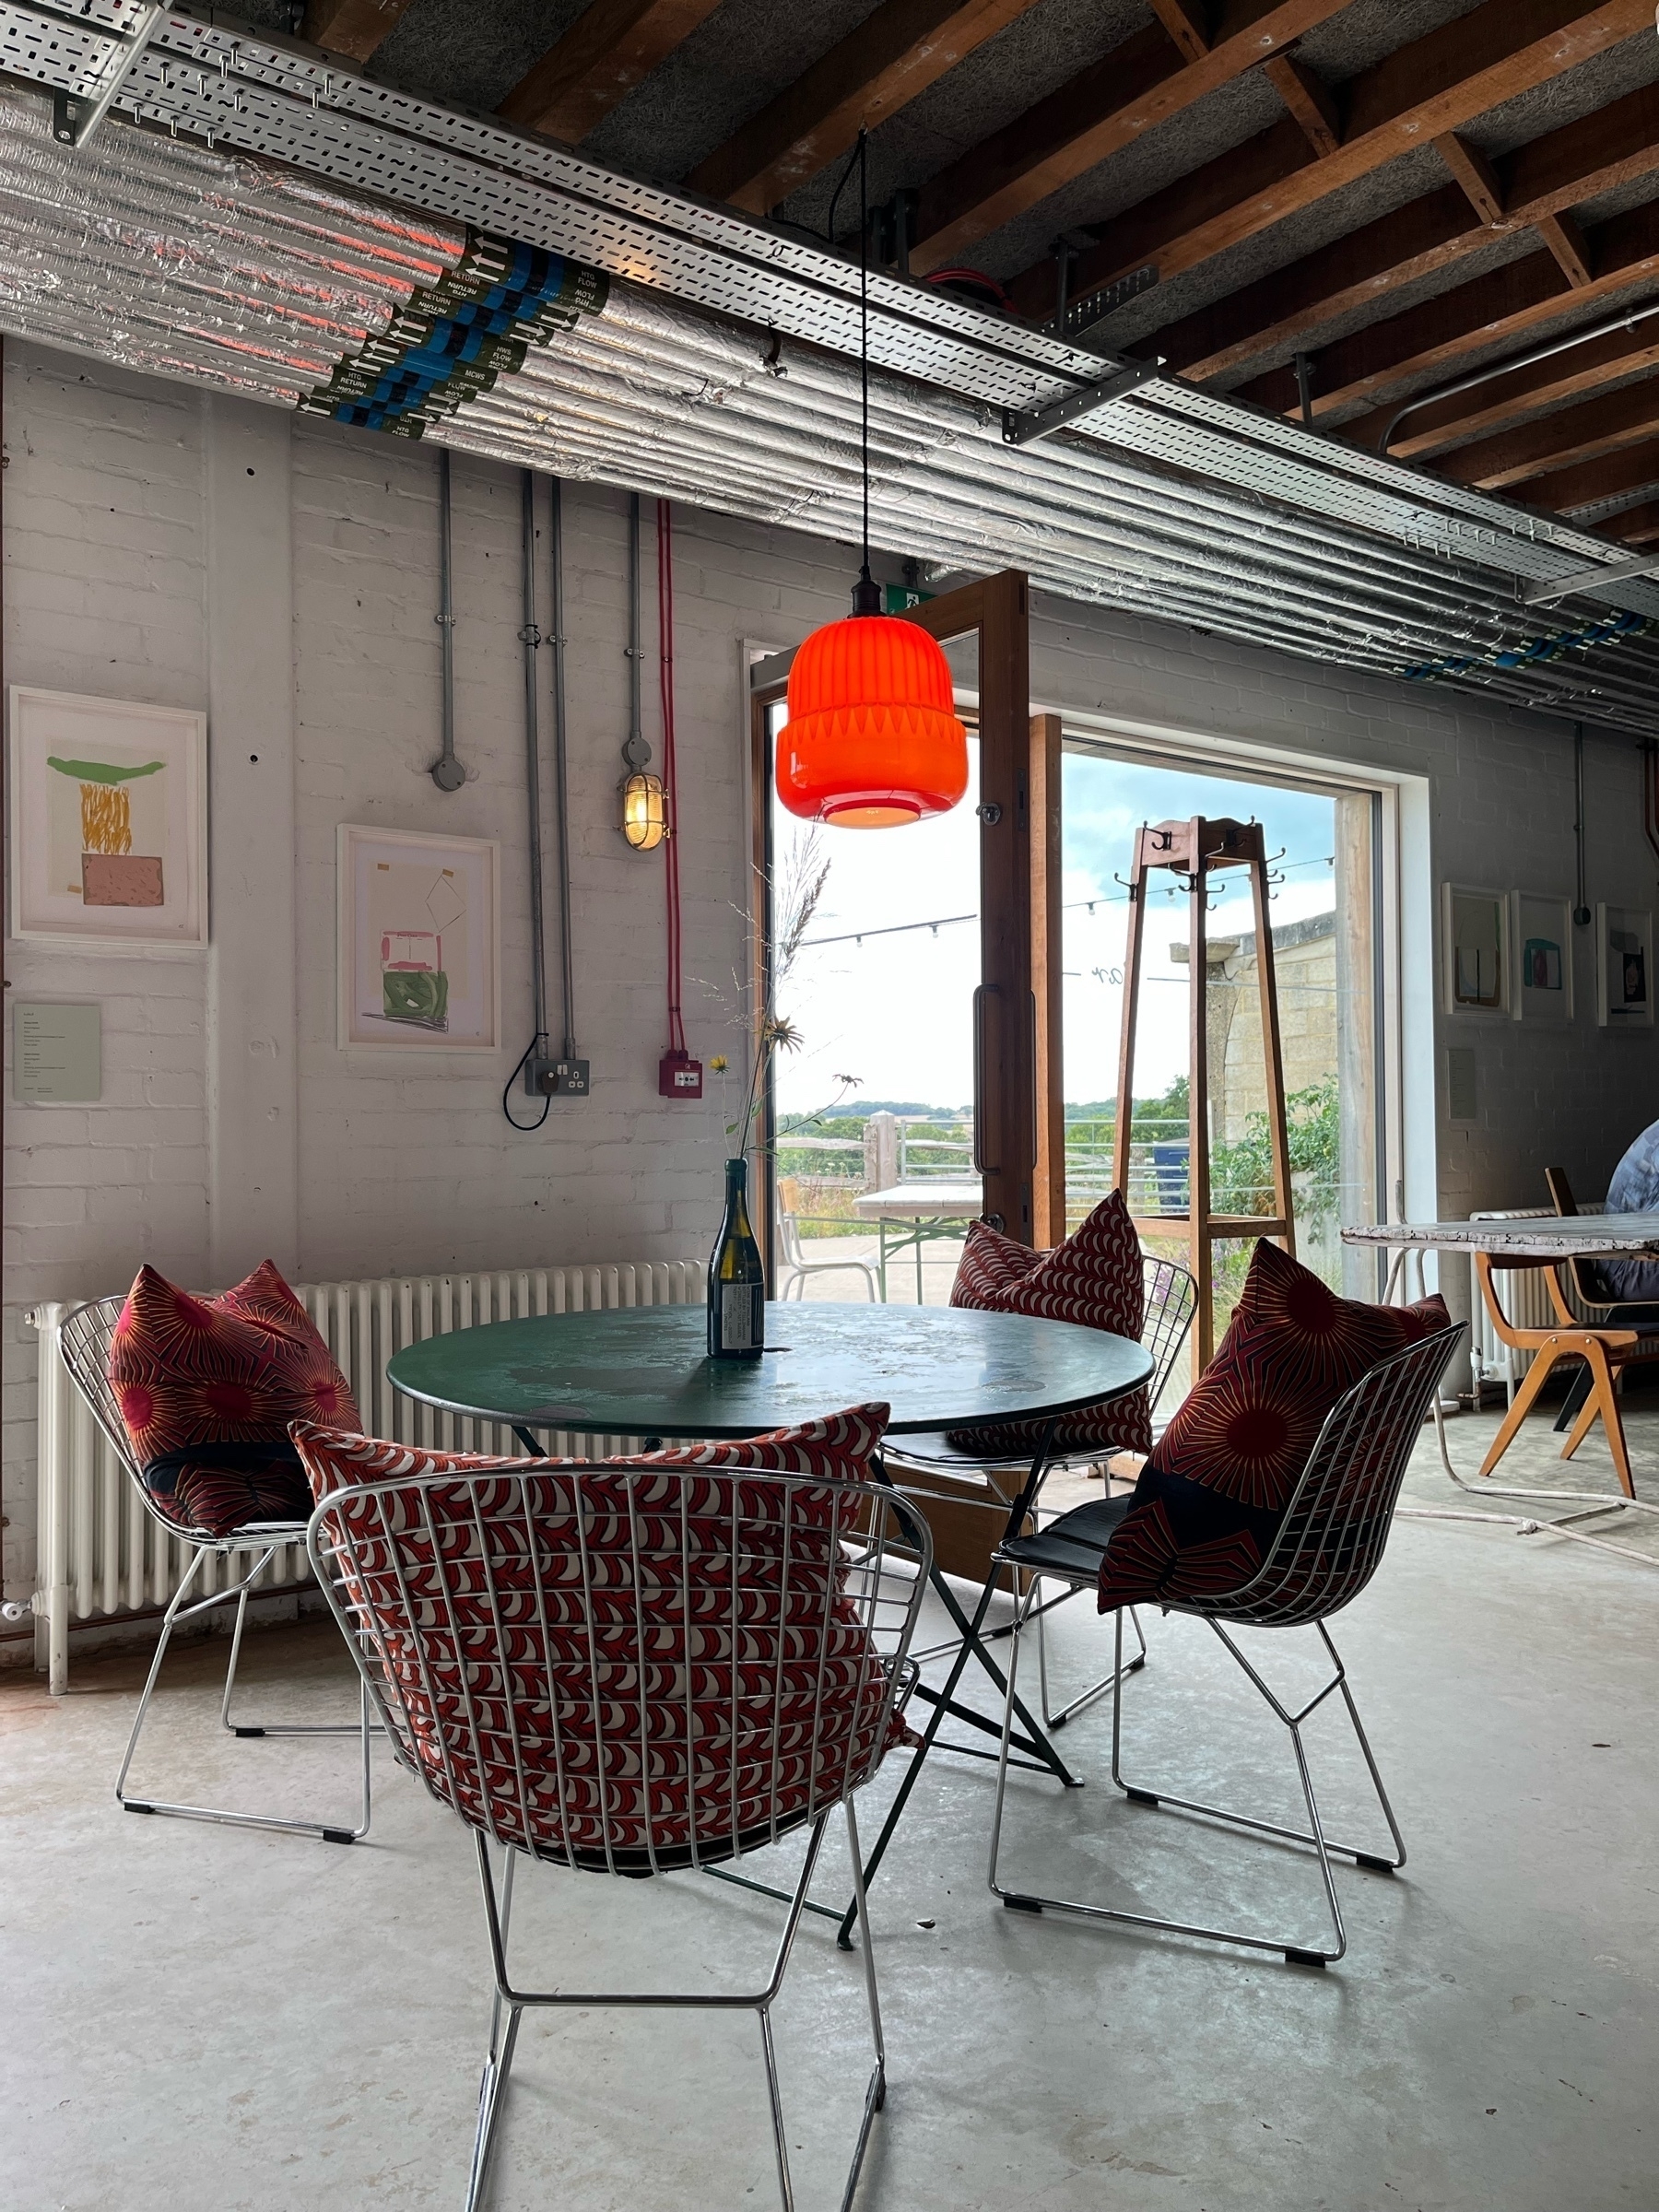 Green round table with orange lamp hanging from the ceiling, four chairs around it with red cuisons on an industrial setting